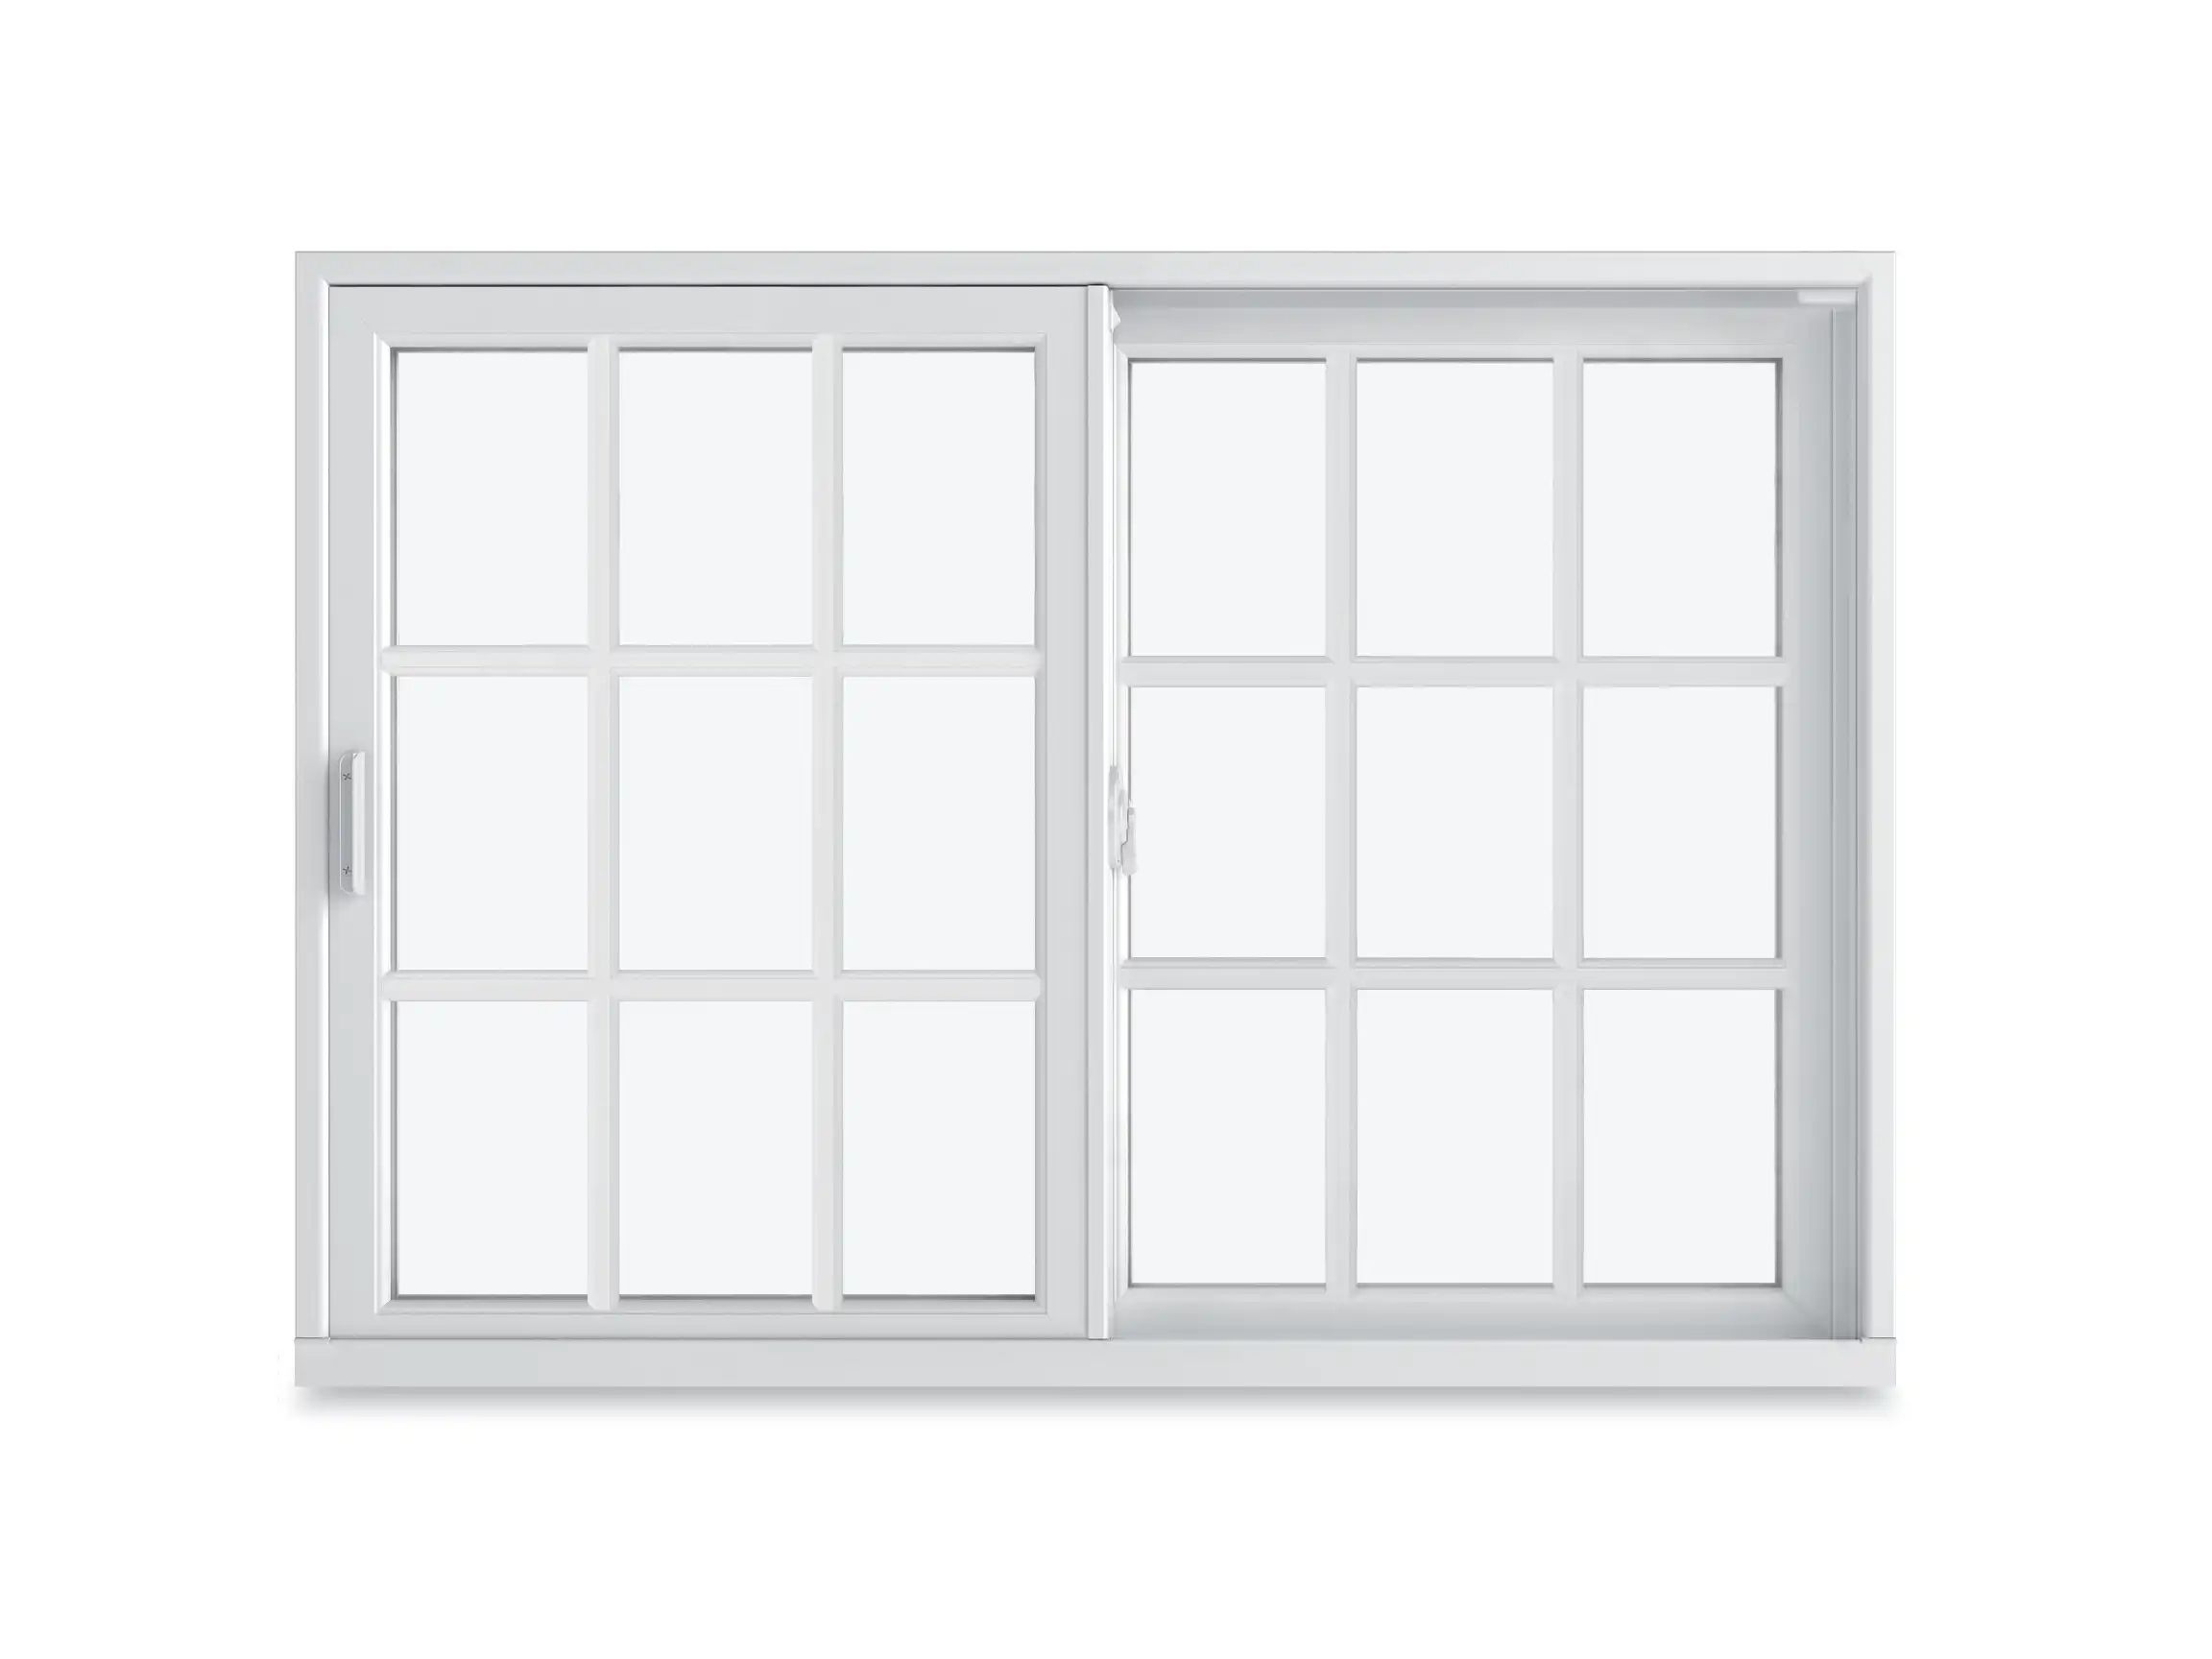 Image of a Marvin Replacement Slider Window with Standard Rectangular Divide Lite style.